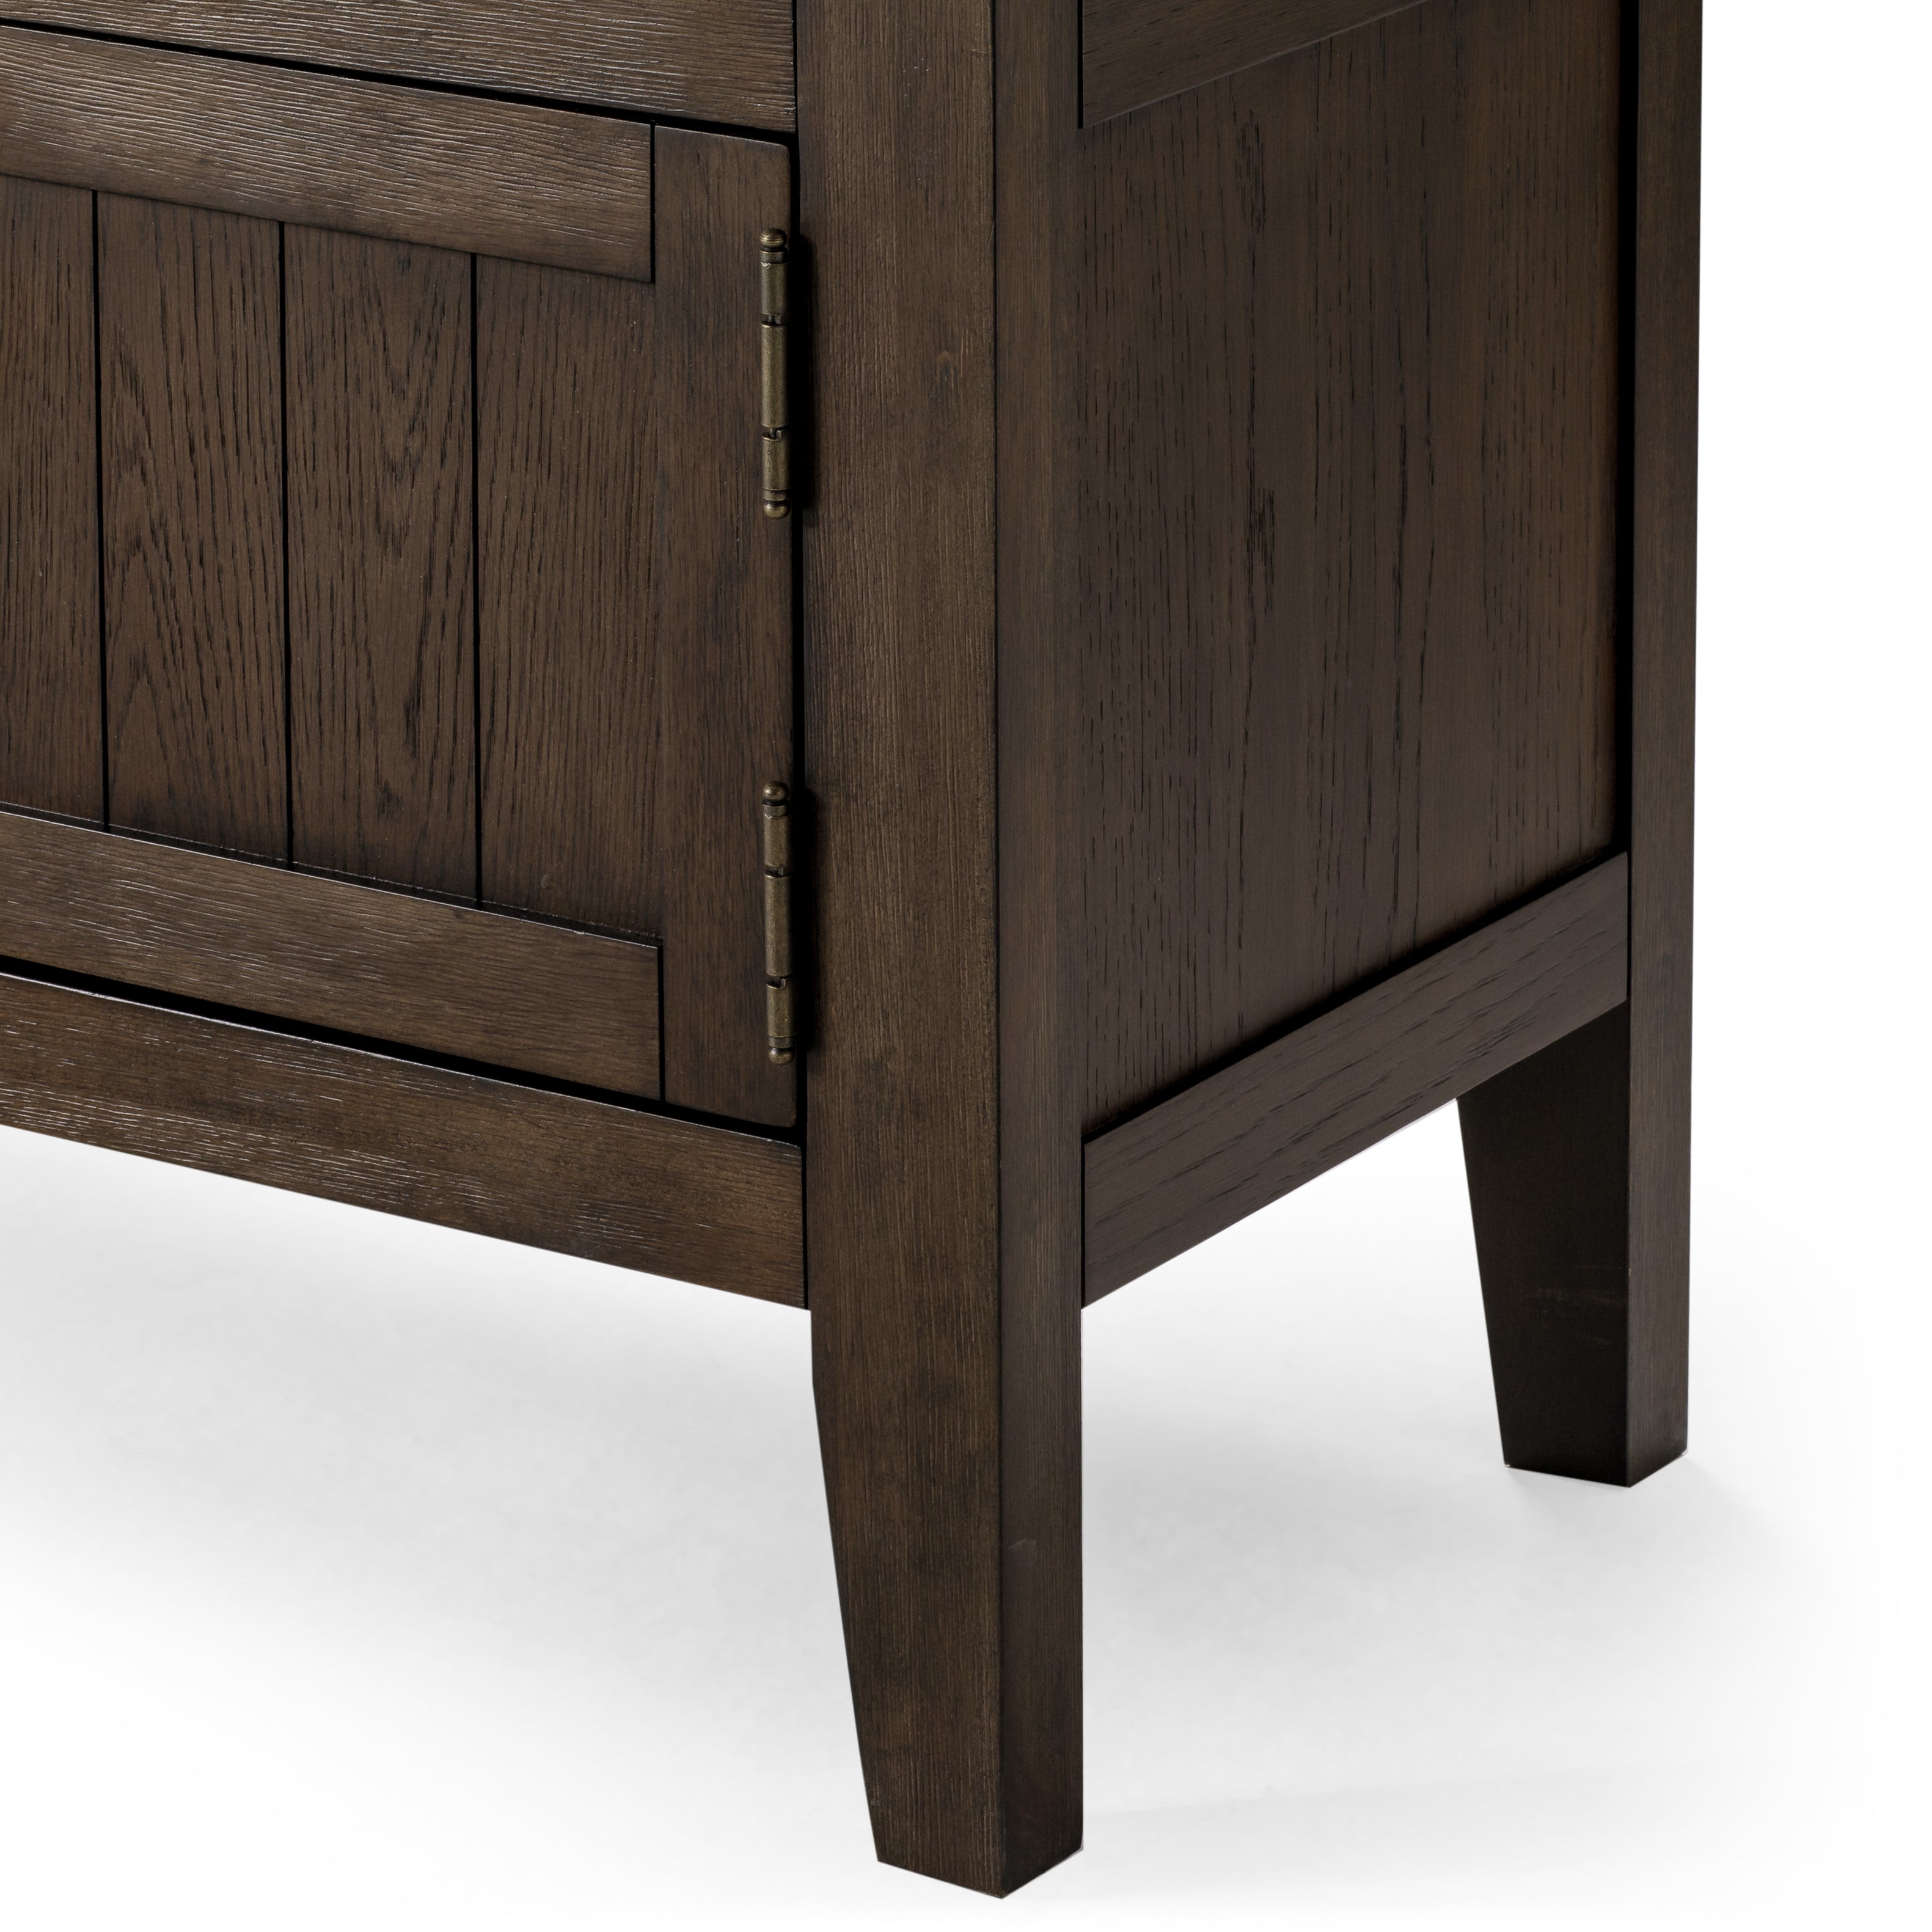 Turner Classical Wooden Media Unit in Antiqued Brown Finish in Media Units by Maven Lane